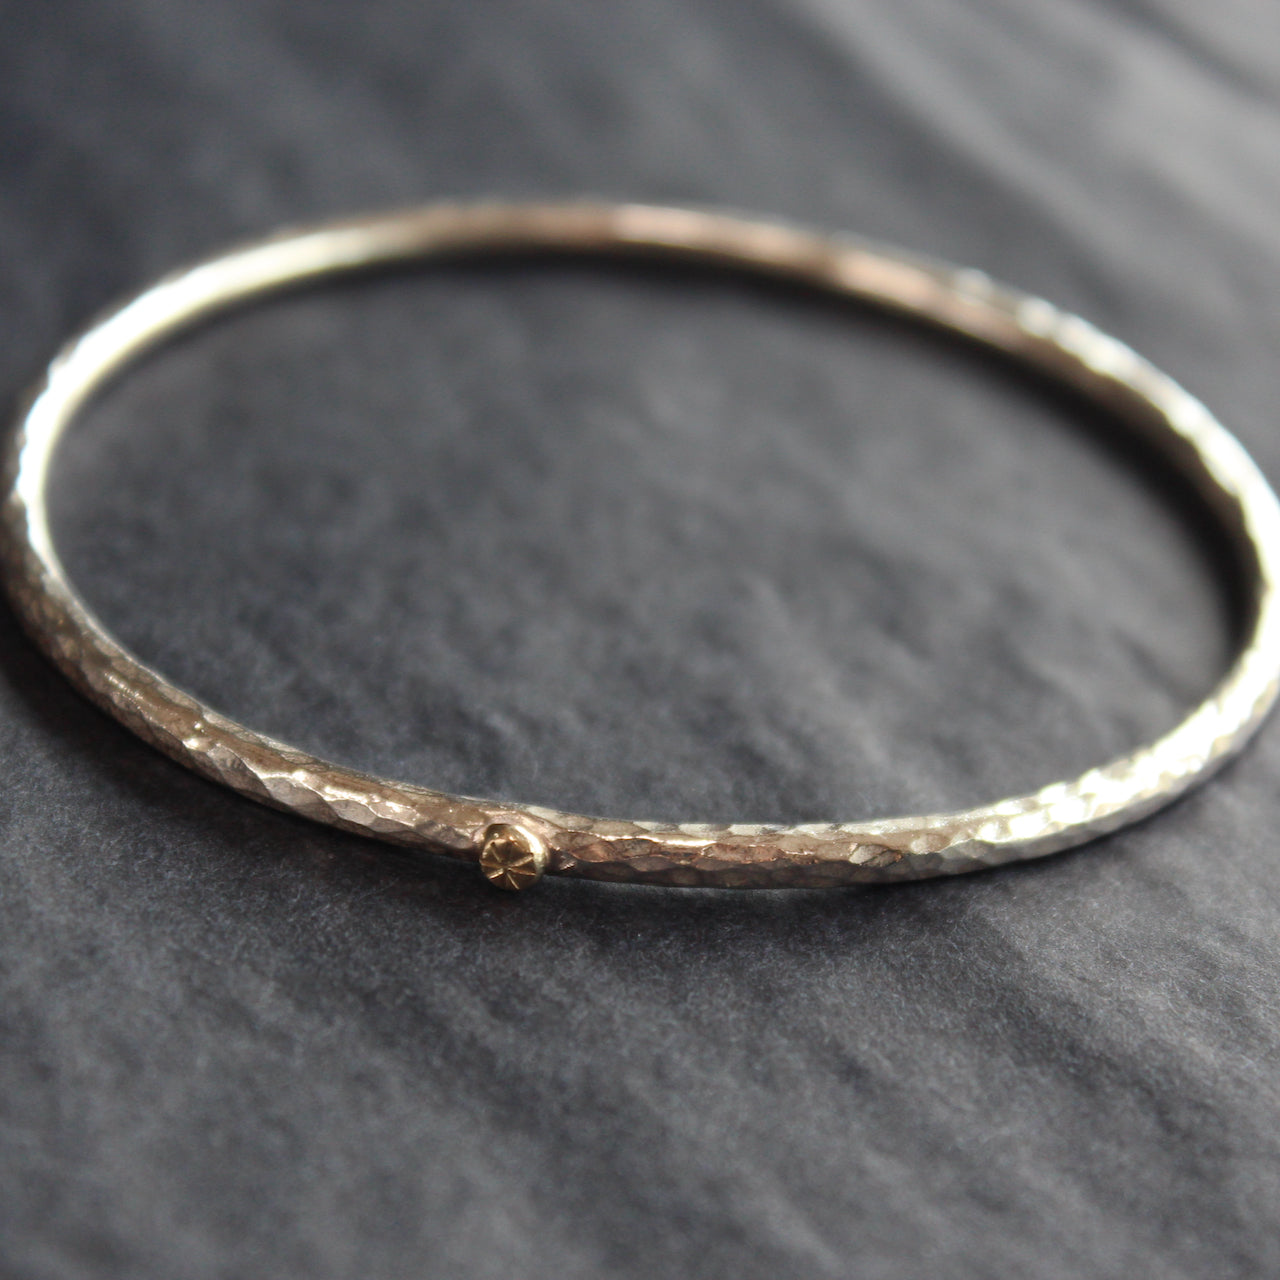 narrow textured silver bangle with small gold dot by Cornwall jewellery designer Lucy Spink 